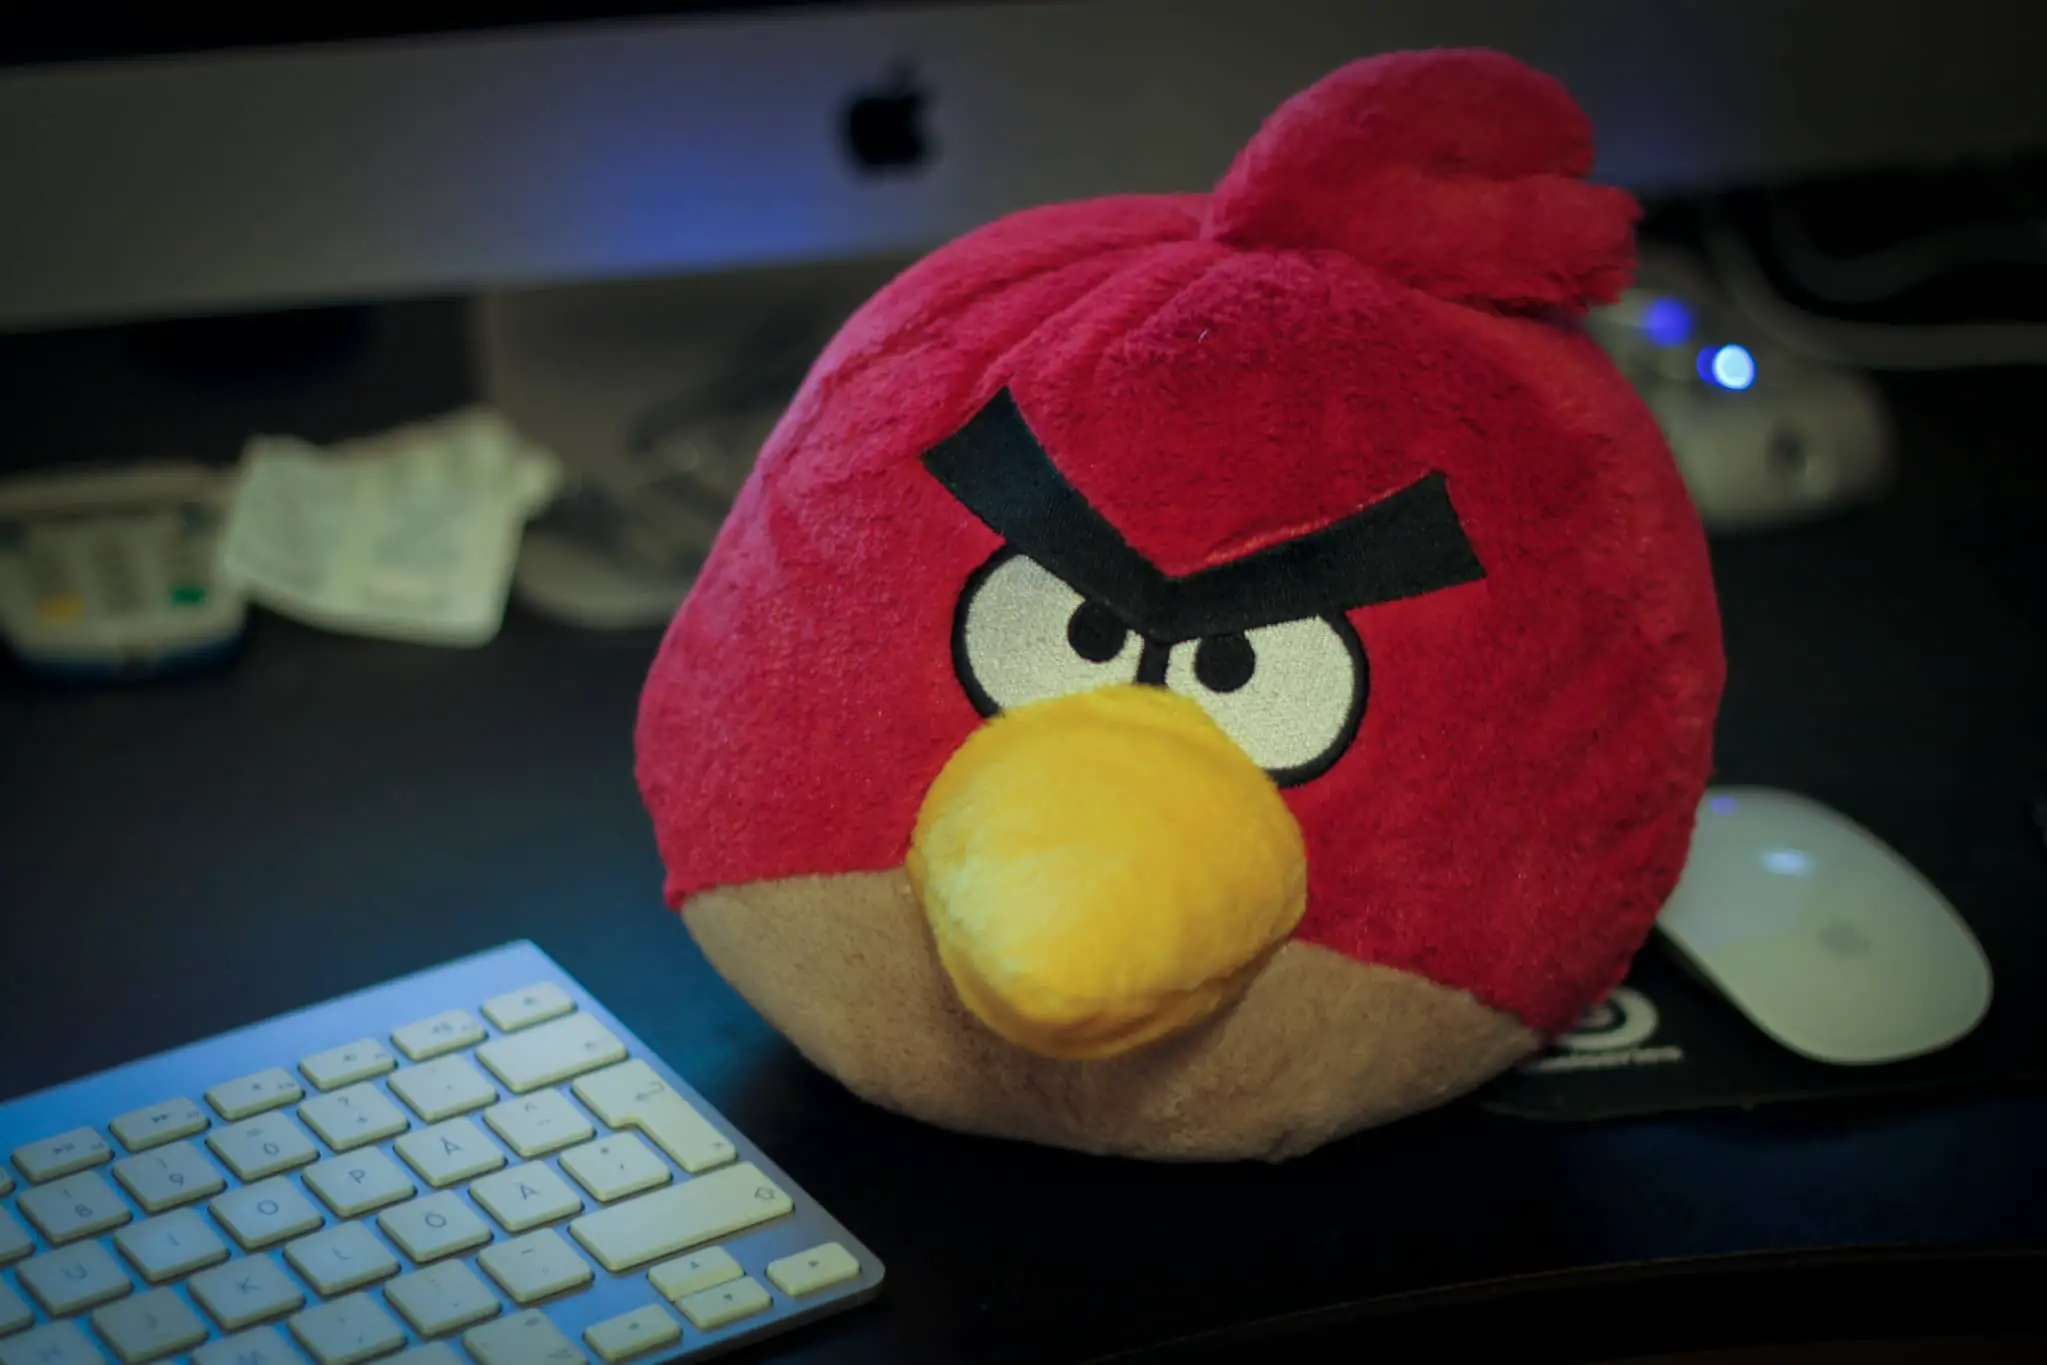 angry bird doll by computer keyboard